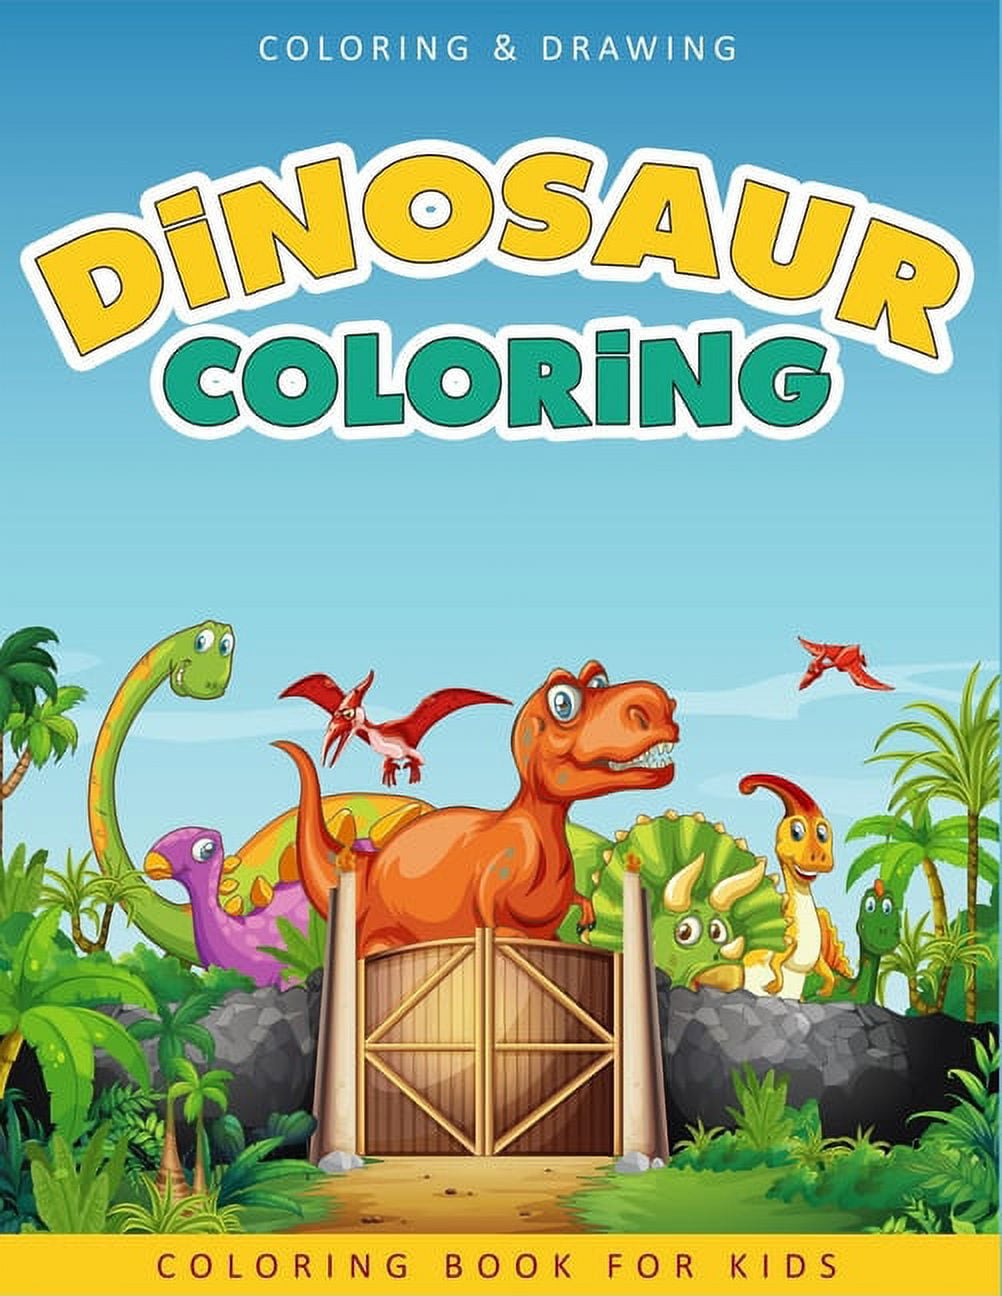 Dinosaur Coloring Book: Dinosaur Colouring Books for Boys, Girls, Kids Ages 3-5, 5-8, 9-12; Fun Party Favors, Realistic Dinosaur Designs [Book]